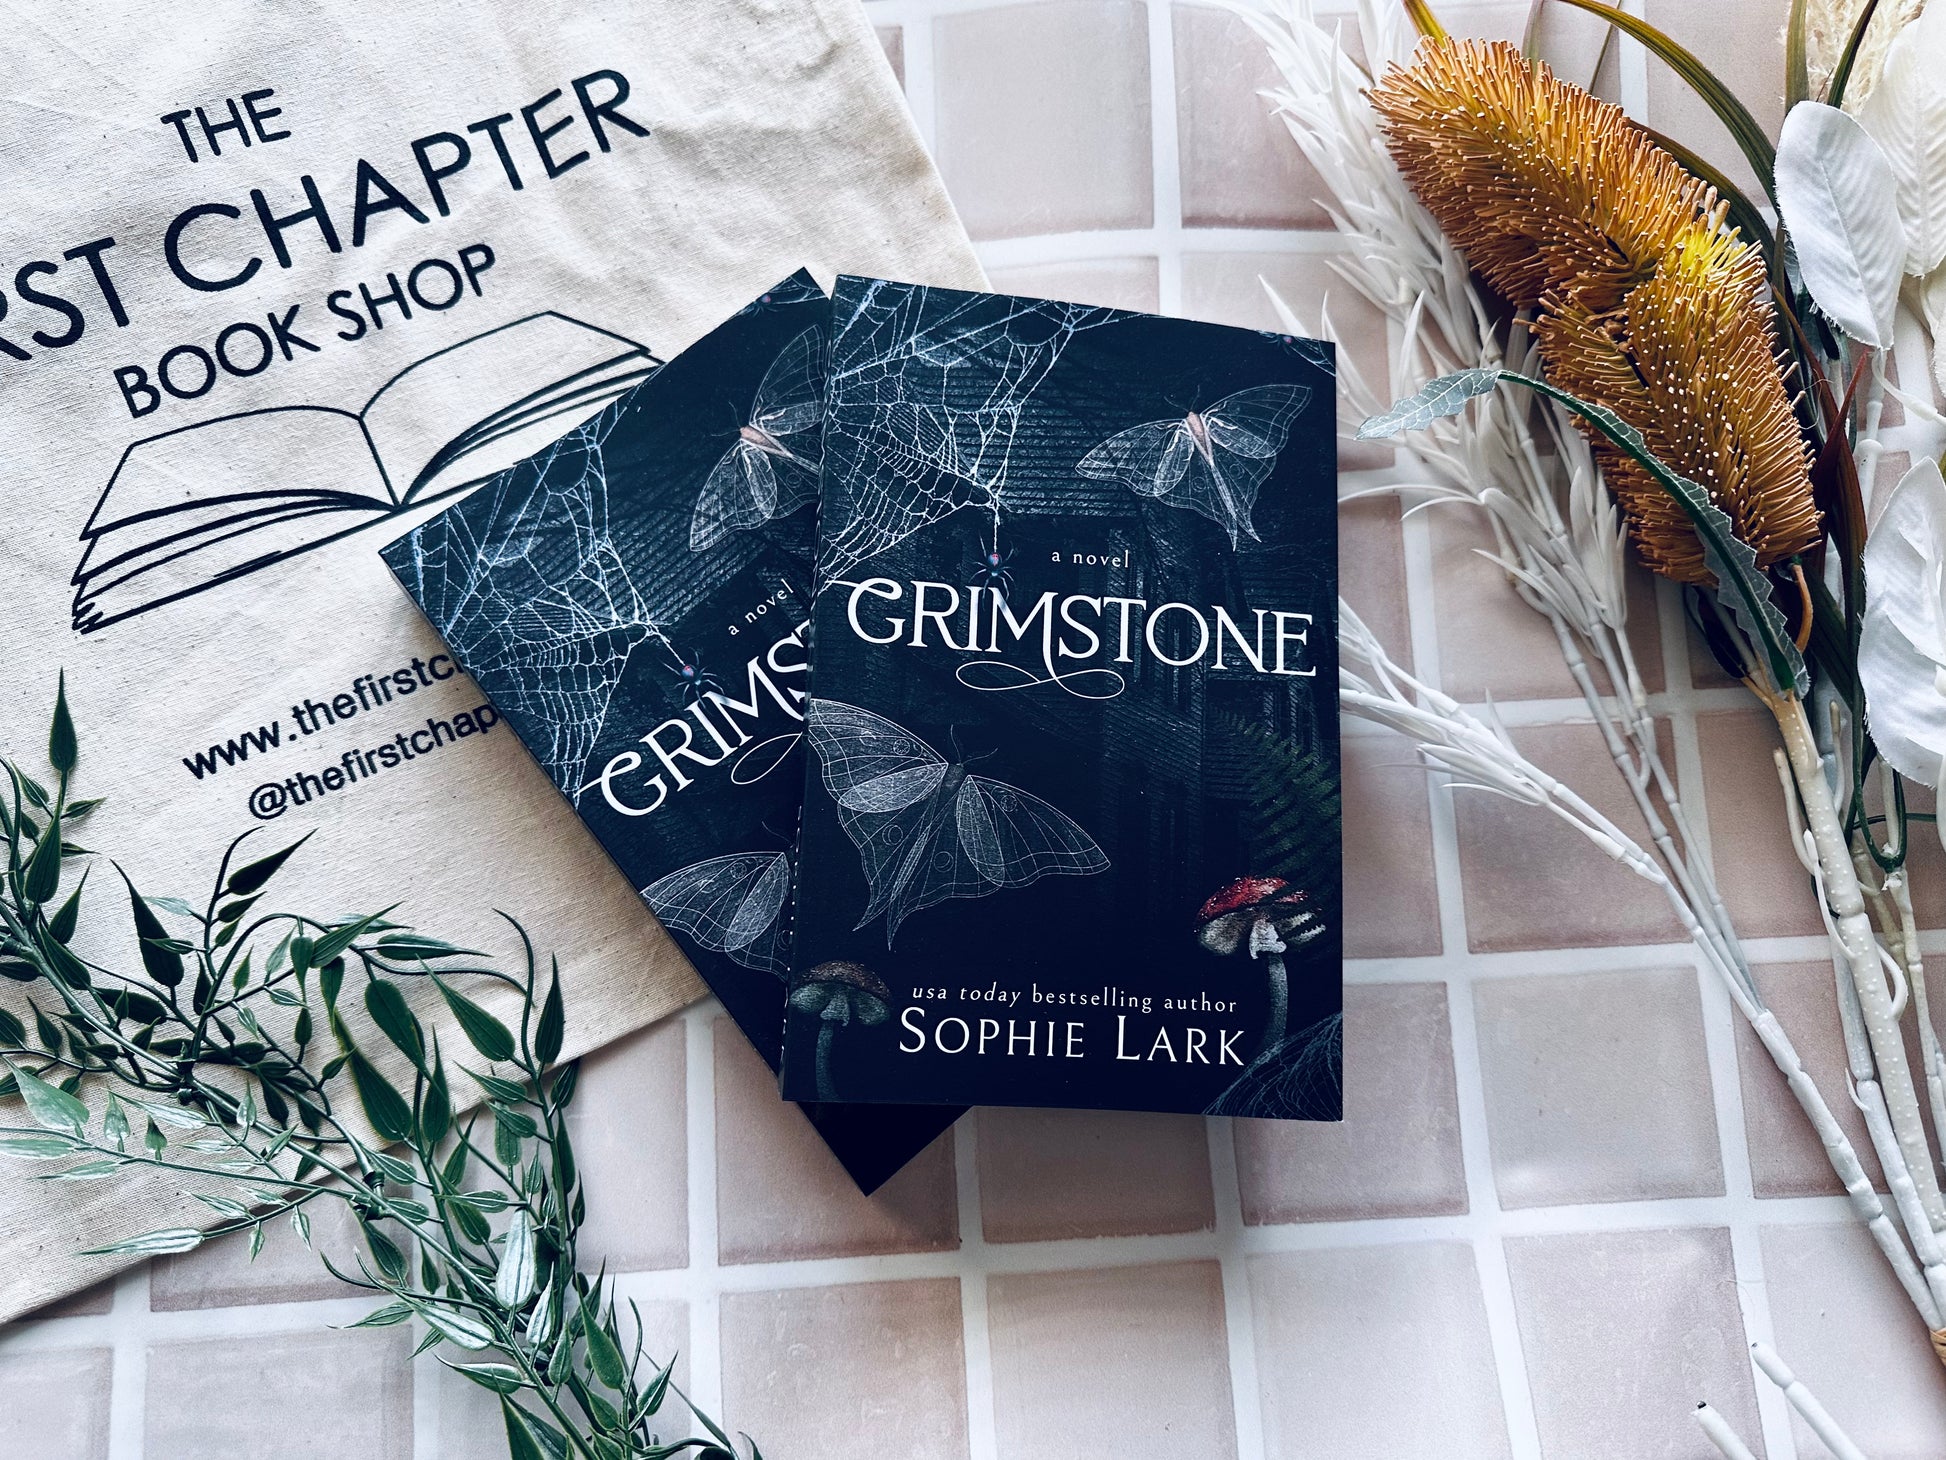 Grimstone by Sophie Lark – The First Chapter Book Shop